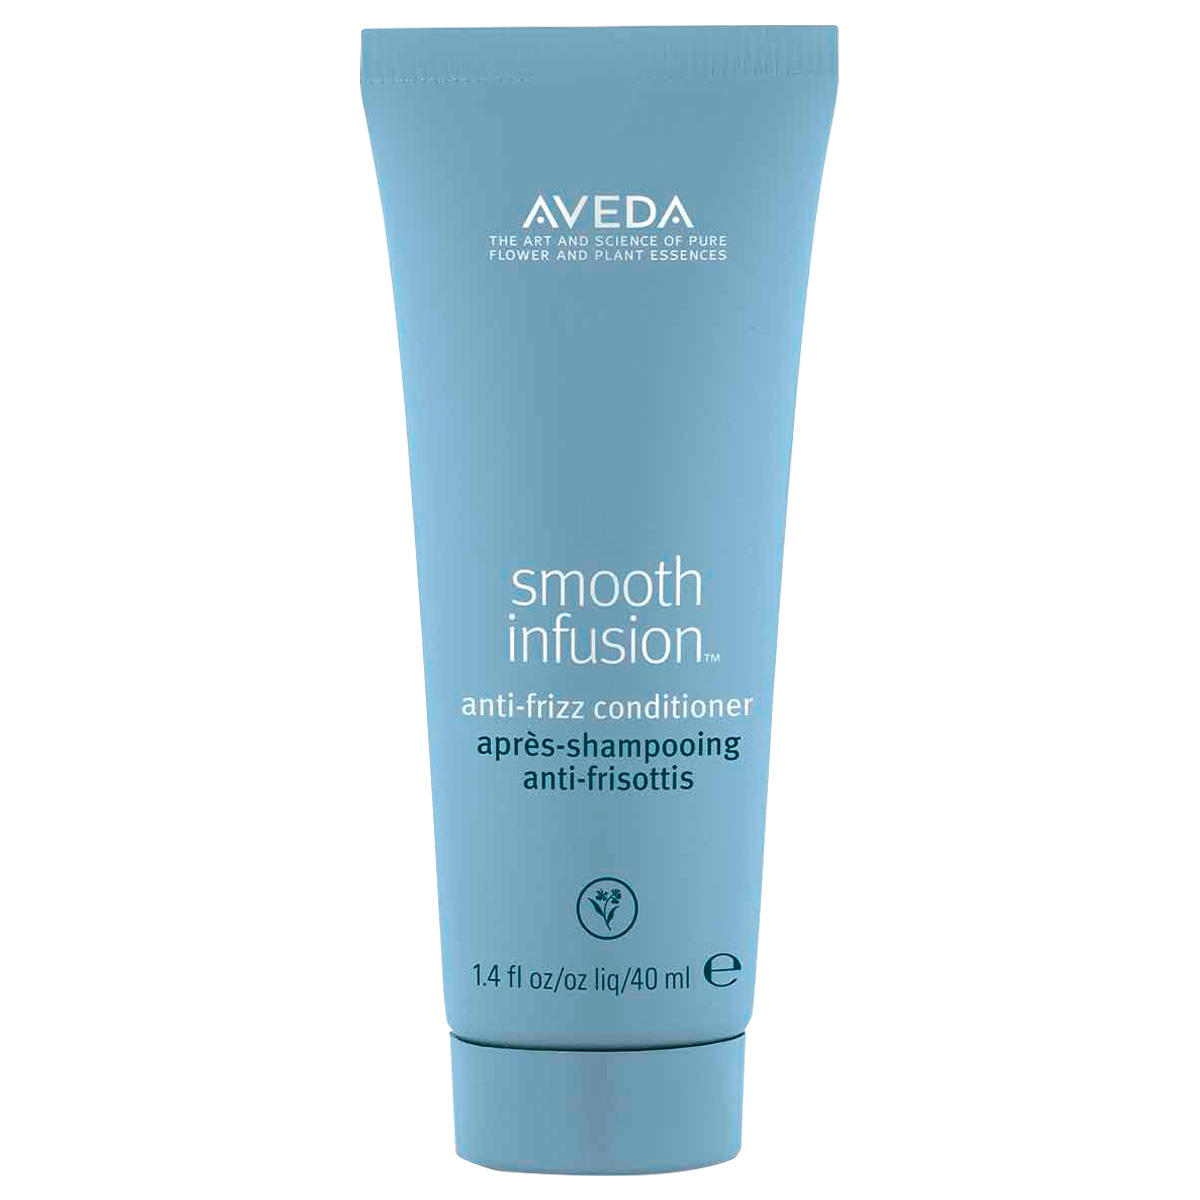 AVEDA Smooth Infusion Anti-Frizz Conditioner 40 ml